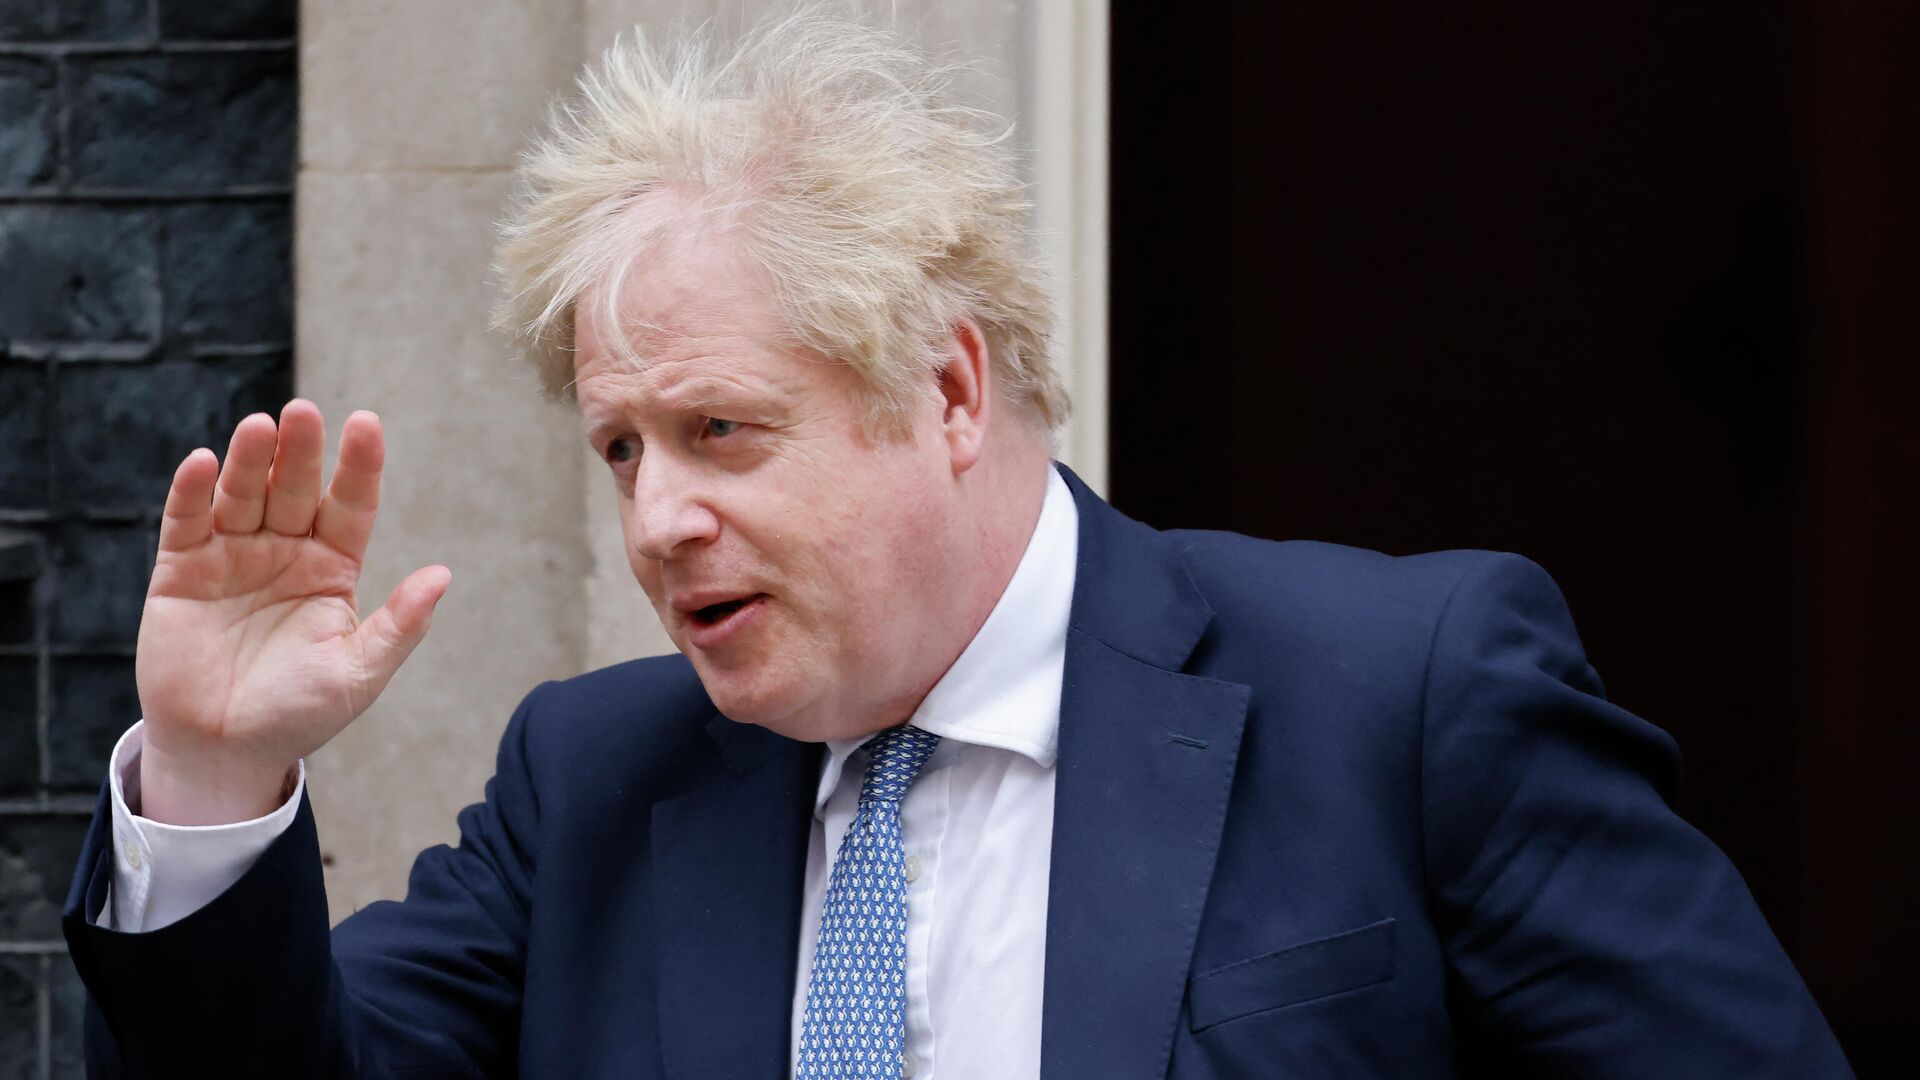 Britain's Prime Minister Boris Johnson waves as he leaves from 10 Downing Street in central London on February 2, 2022 to take part in the weekly session of Prime Minister's Questions (PMQs) at the House of Commons. - Sputnik International, 1920, 03.05.2022